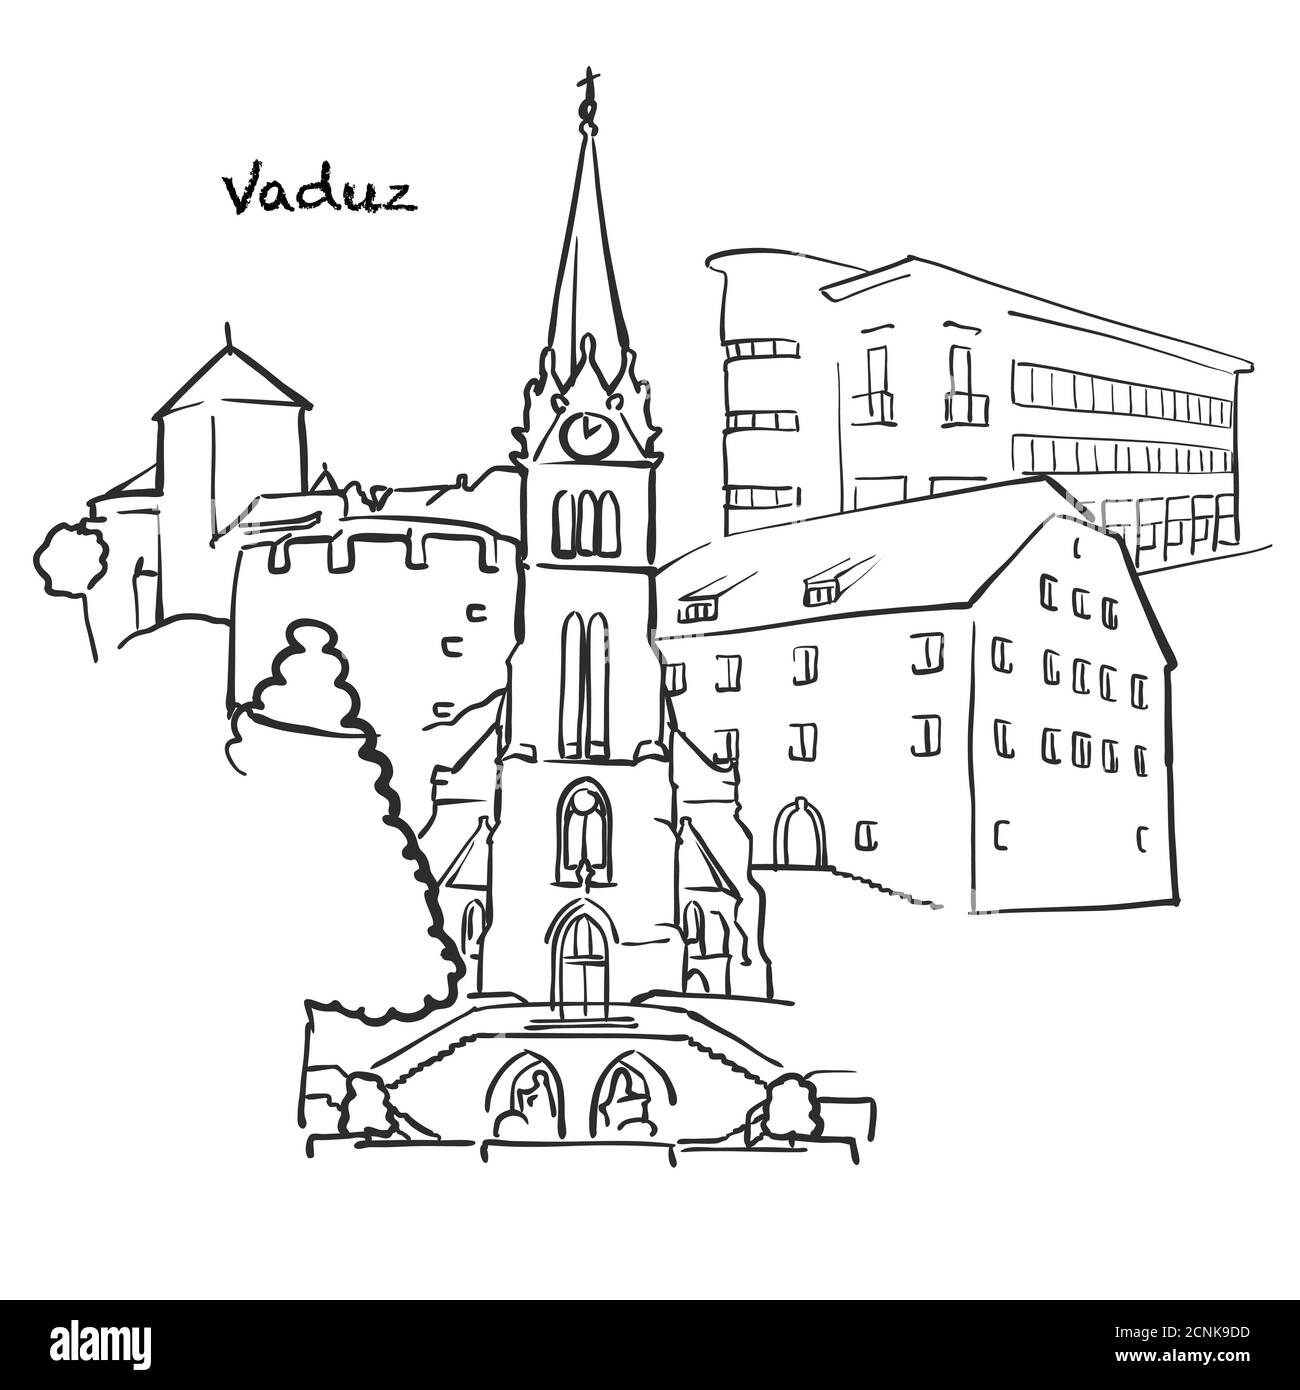 Famous buildings of Vaduz, Liechtenstein Composition. Hand-drawn black and white vector illustration. Grouped and movable objects. Stock Vector